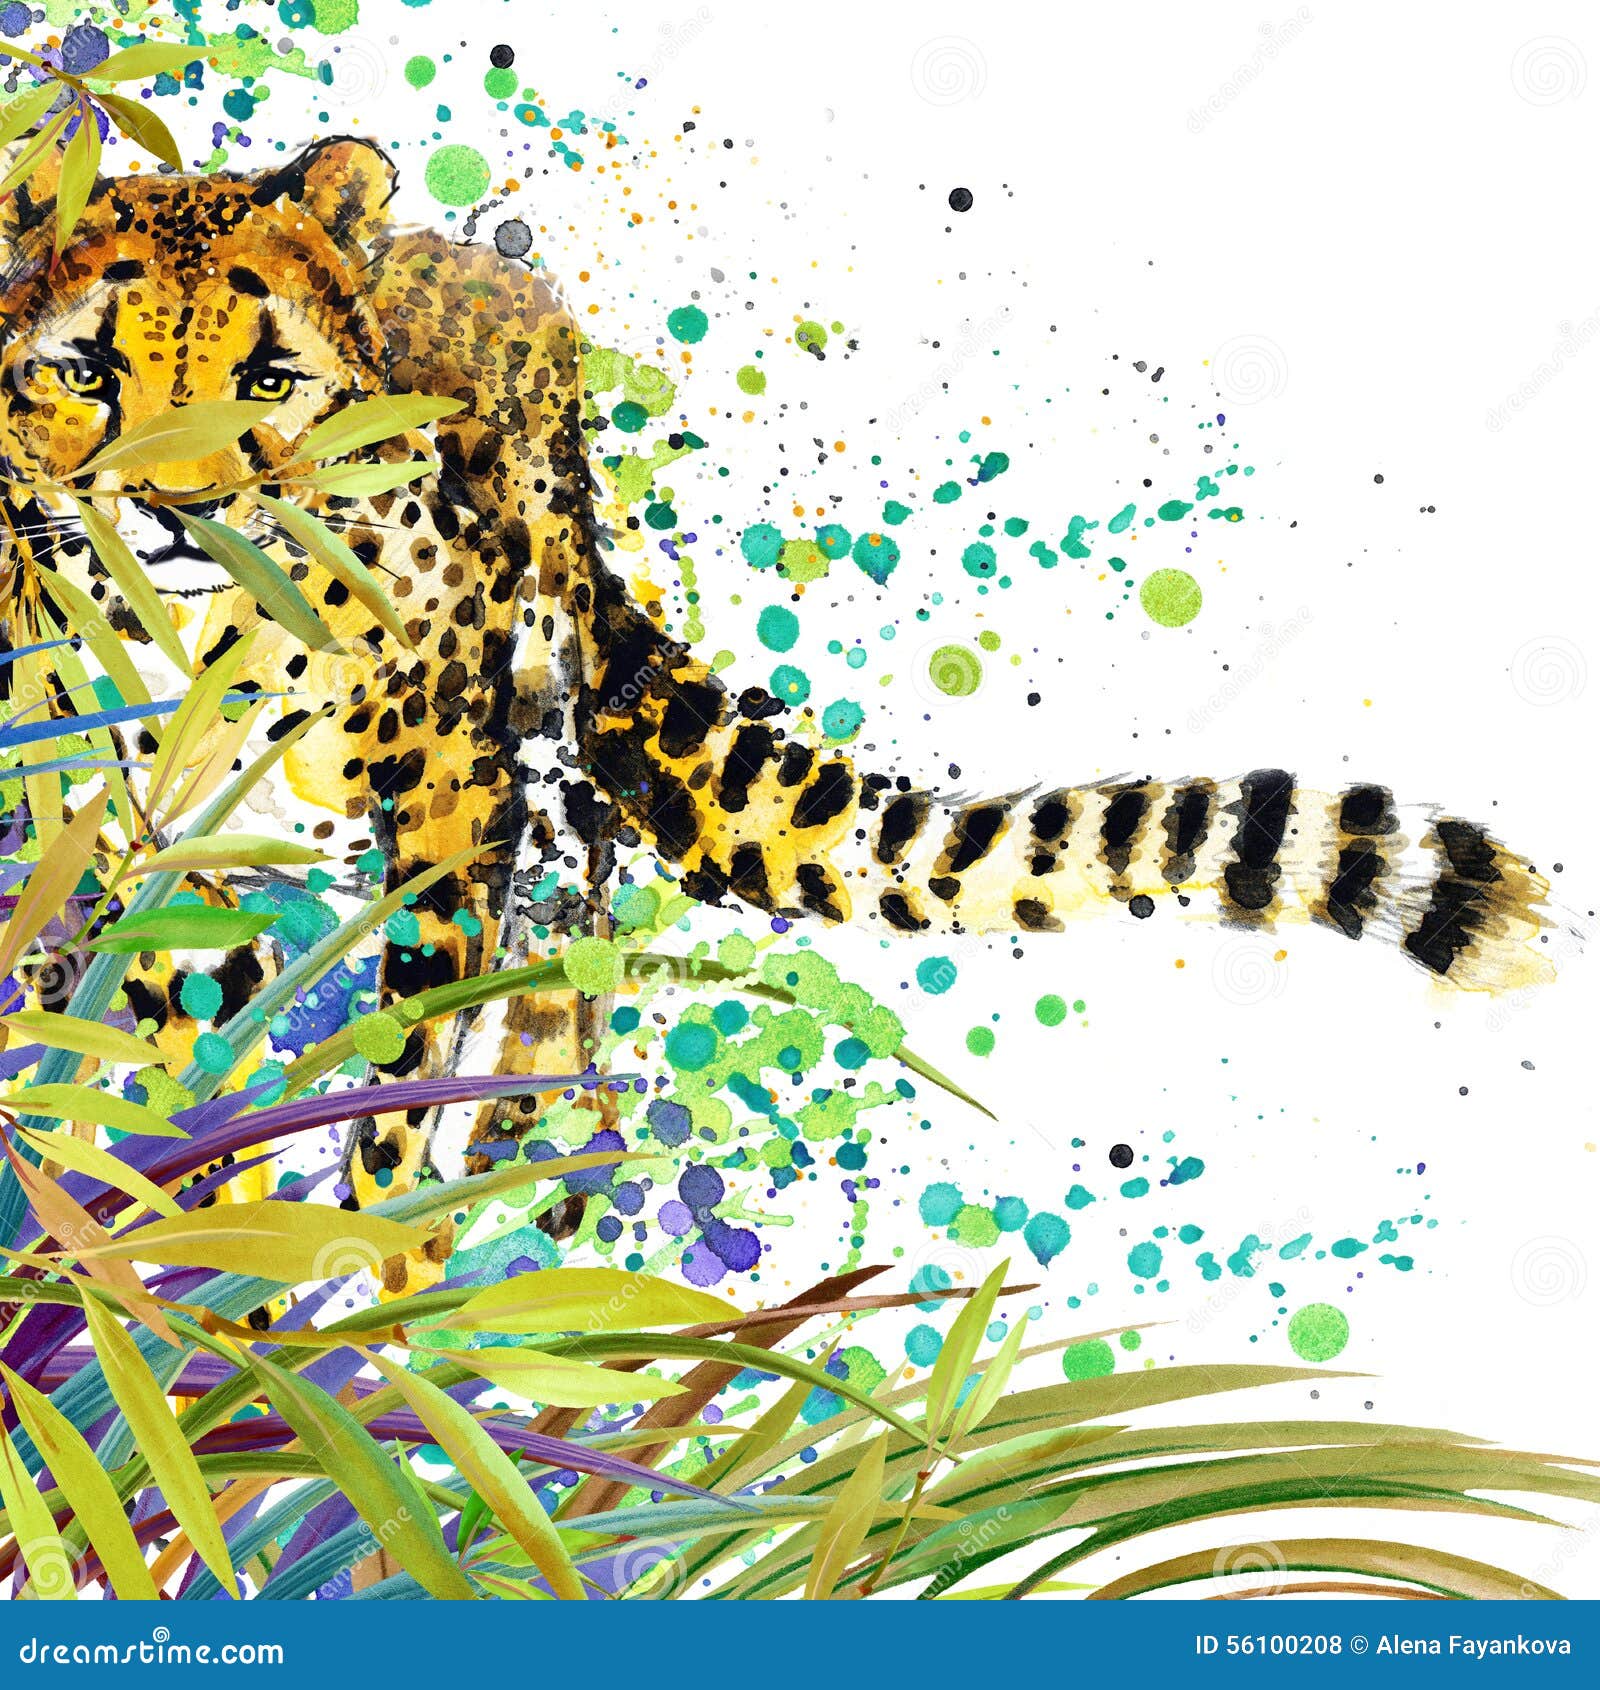 tropical exotic forest, green leaves, wildlife, cheetah, watercolor . watercolor background unusual exotic nature